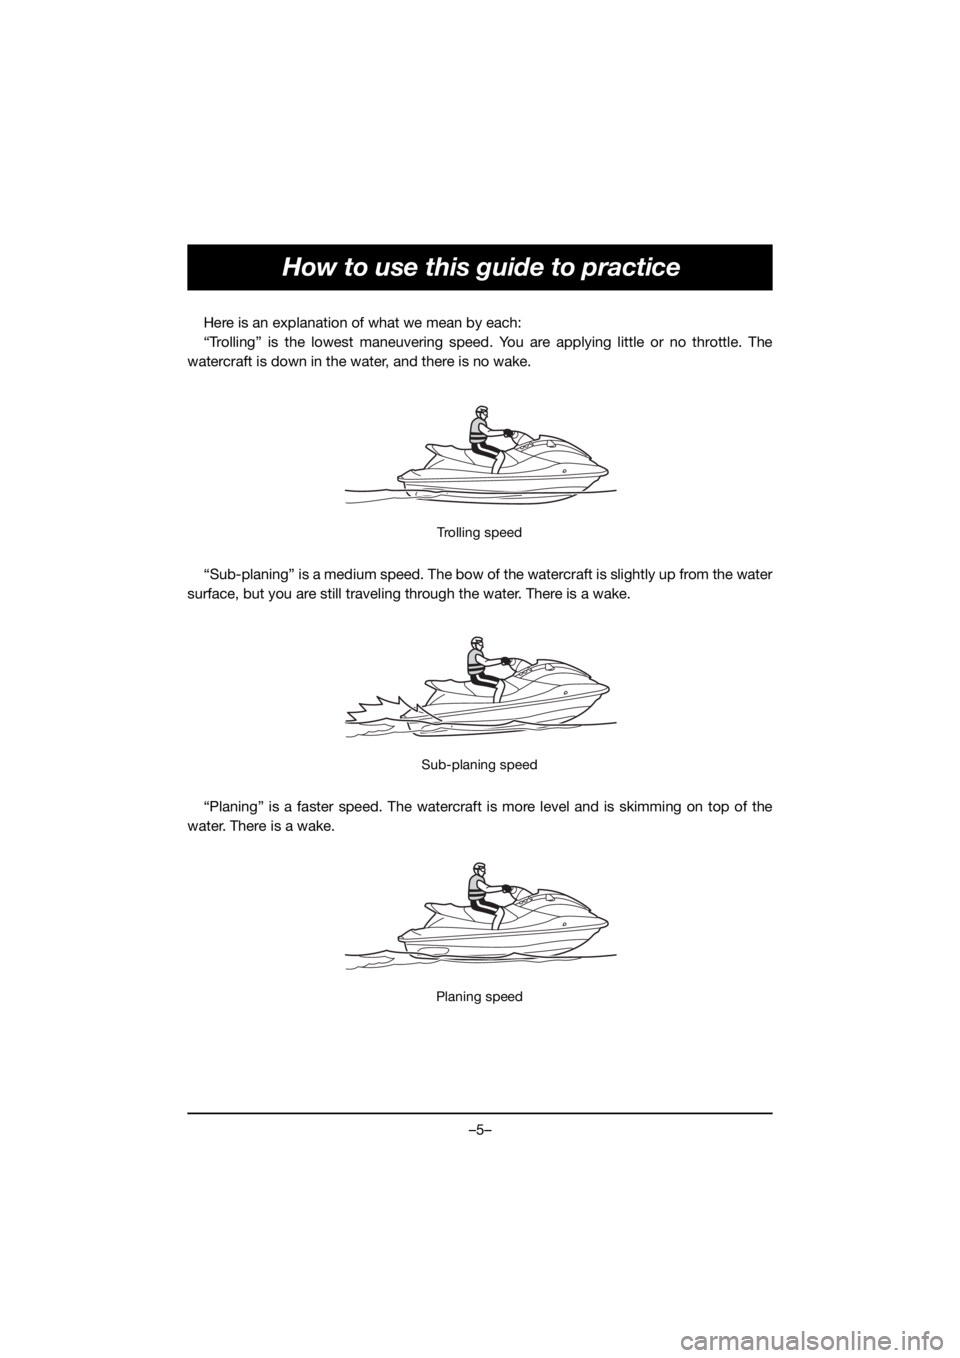 YAMAHA VX DELUXE 2020  Notices Demploi (in French) –5–
How to use this guide to practice
Here is an explanation of what we mean by each:
“Trolling” is the lowest maneuvering speed. You are applying little or no throttle. The
watercraft is down